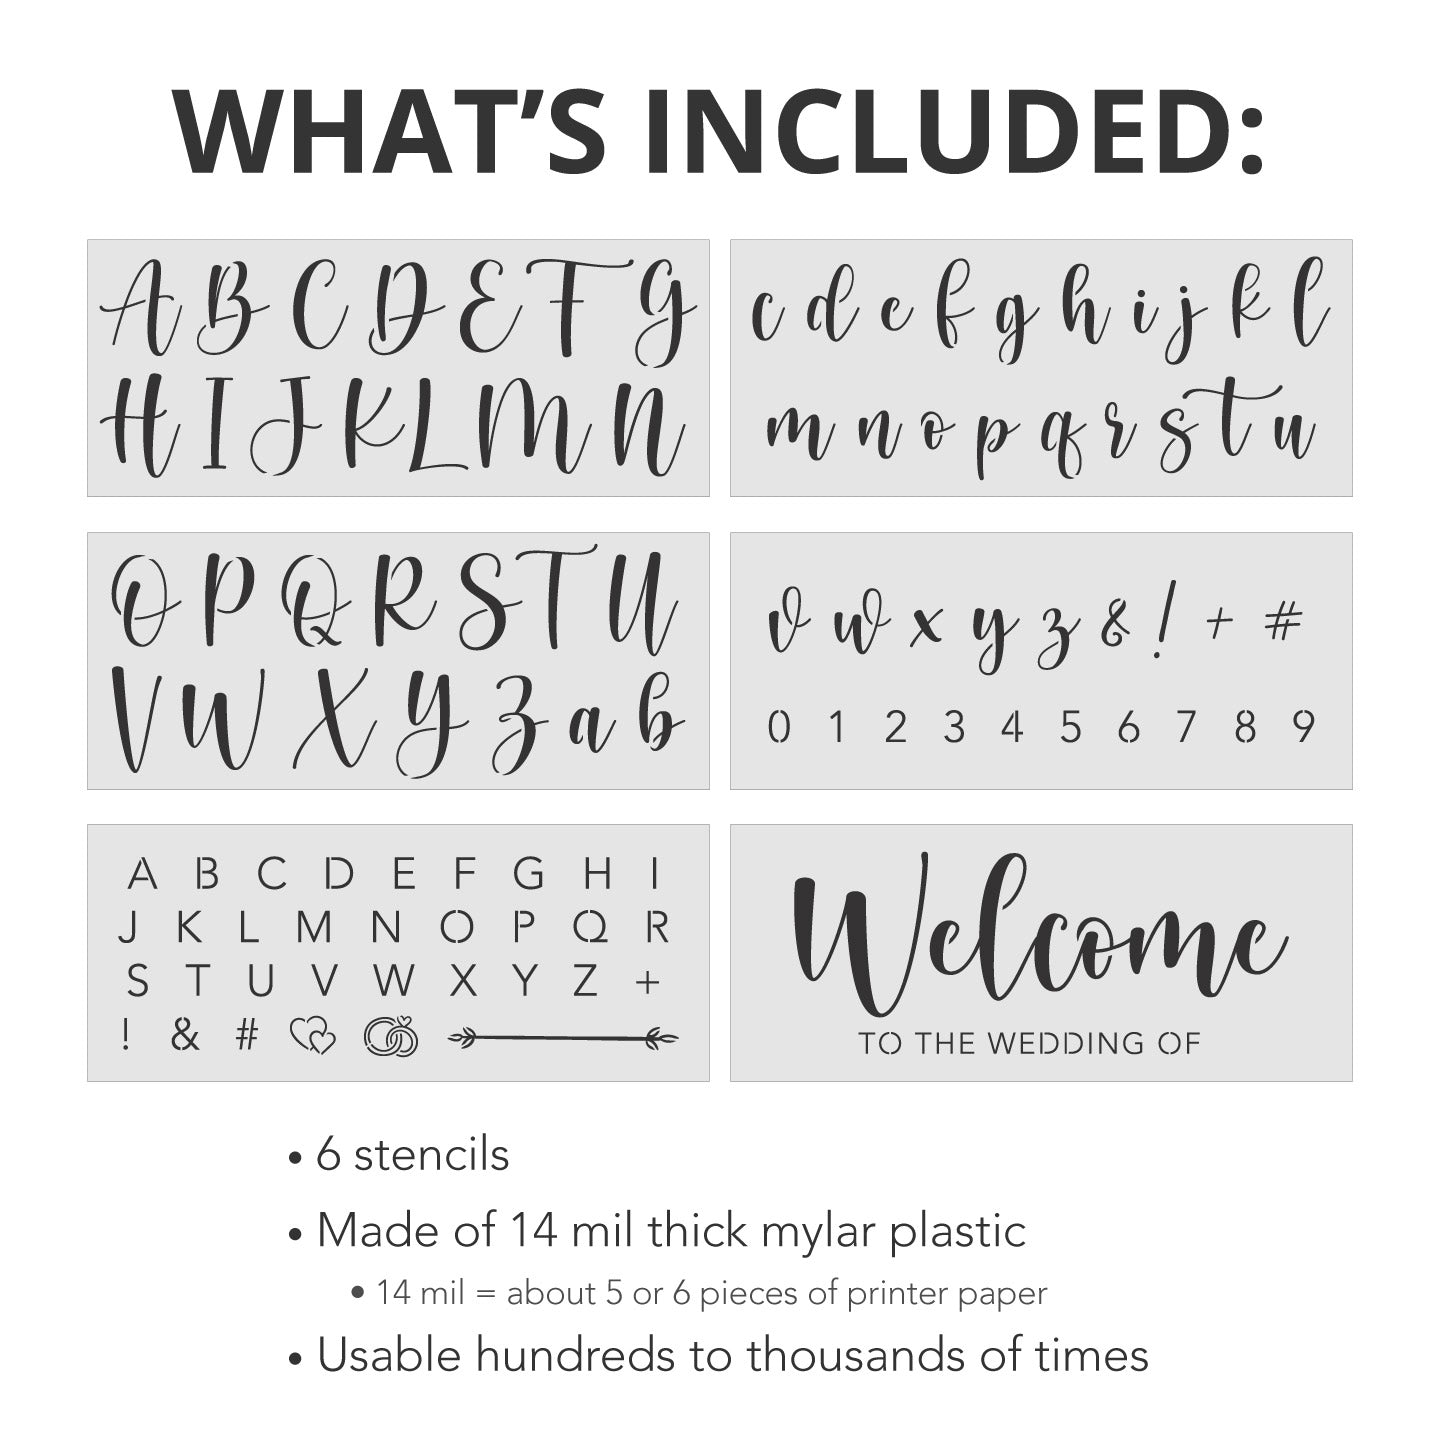 Alphabet Stencil Letters Stencil Custom Stencils Create Custom Signs  Reusable Made2016 A-Z Letters 7 Sizes Lower Case Letters -  Denmark